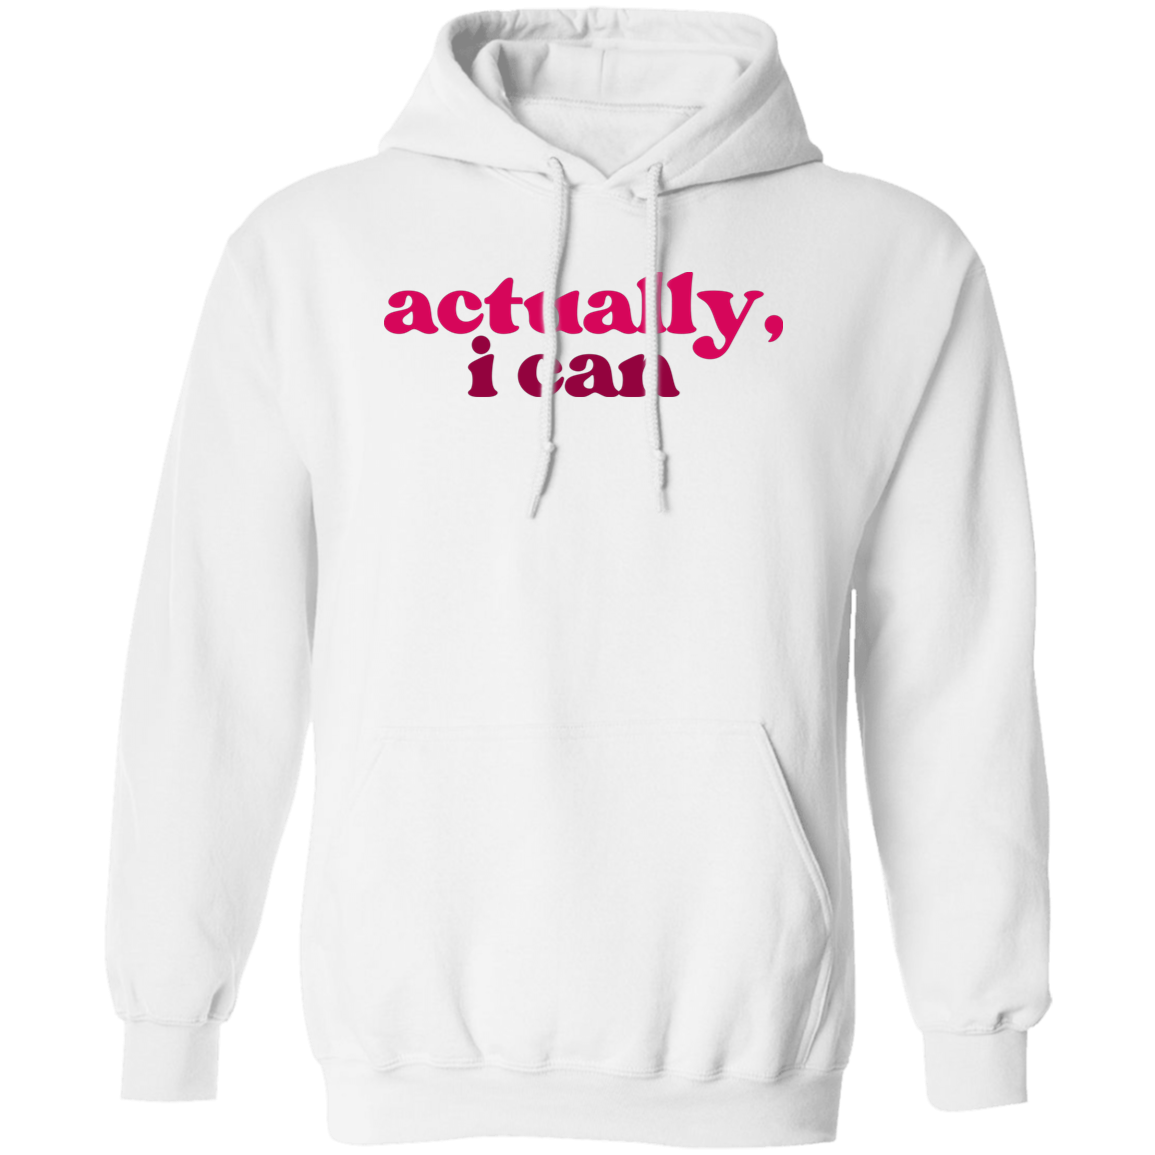 Actually, I Can Hoodie